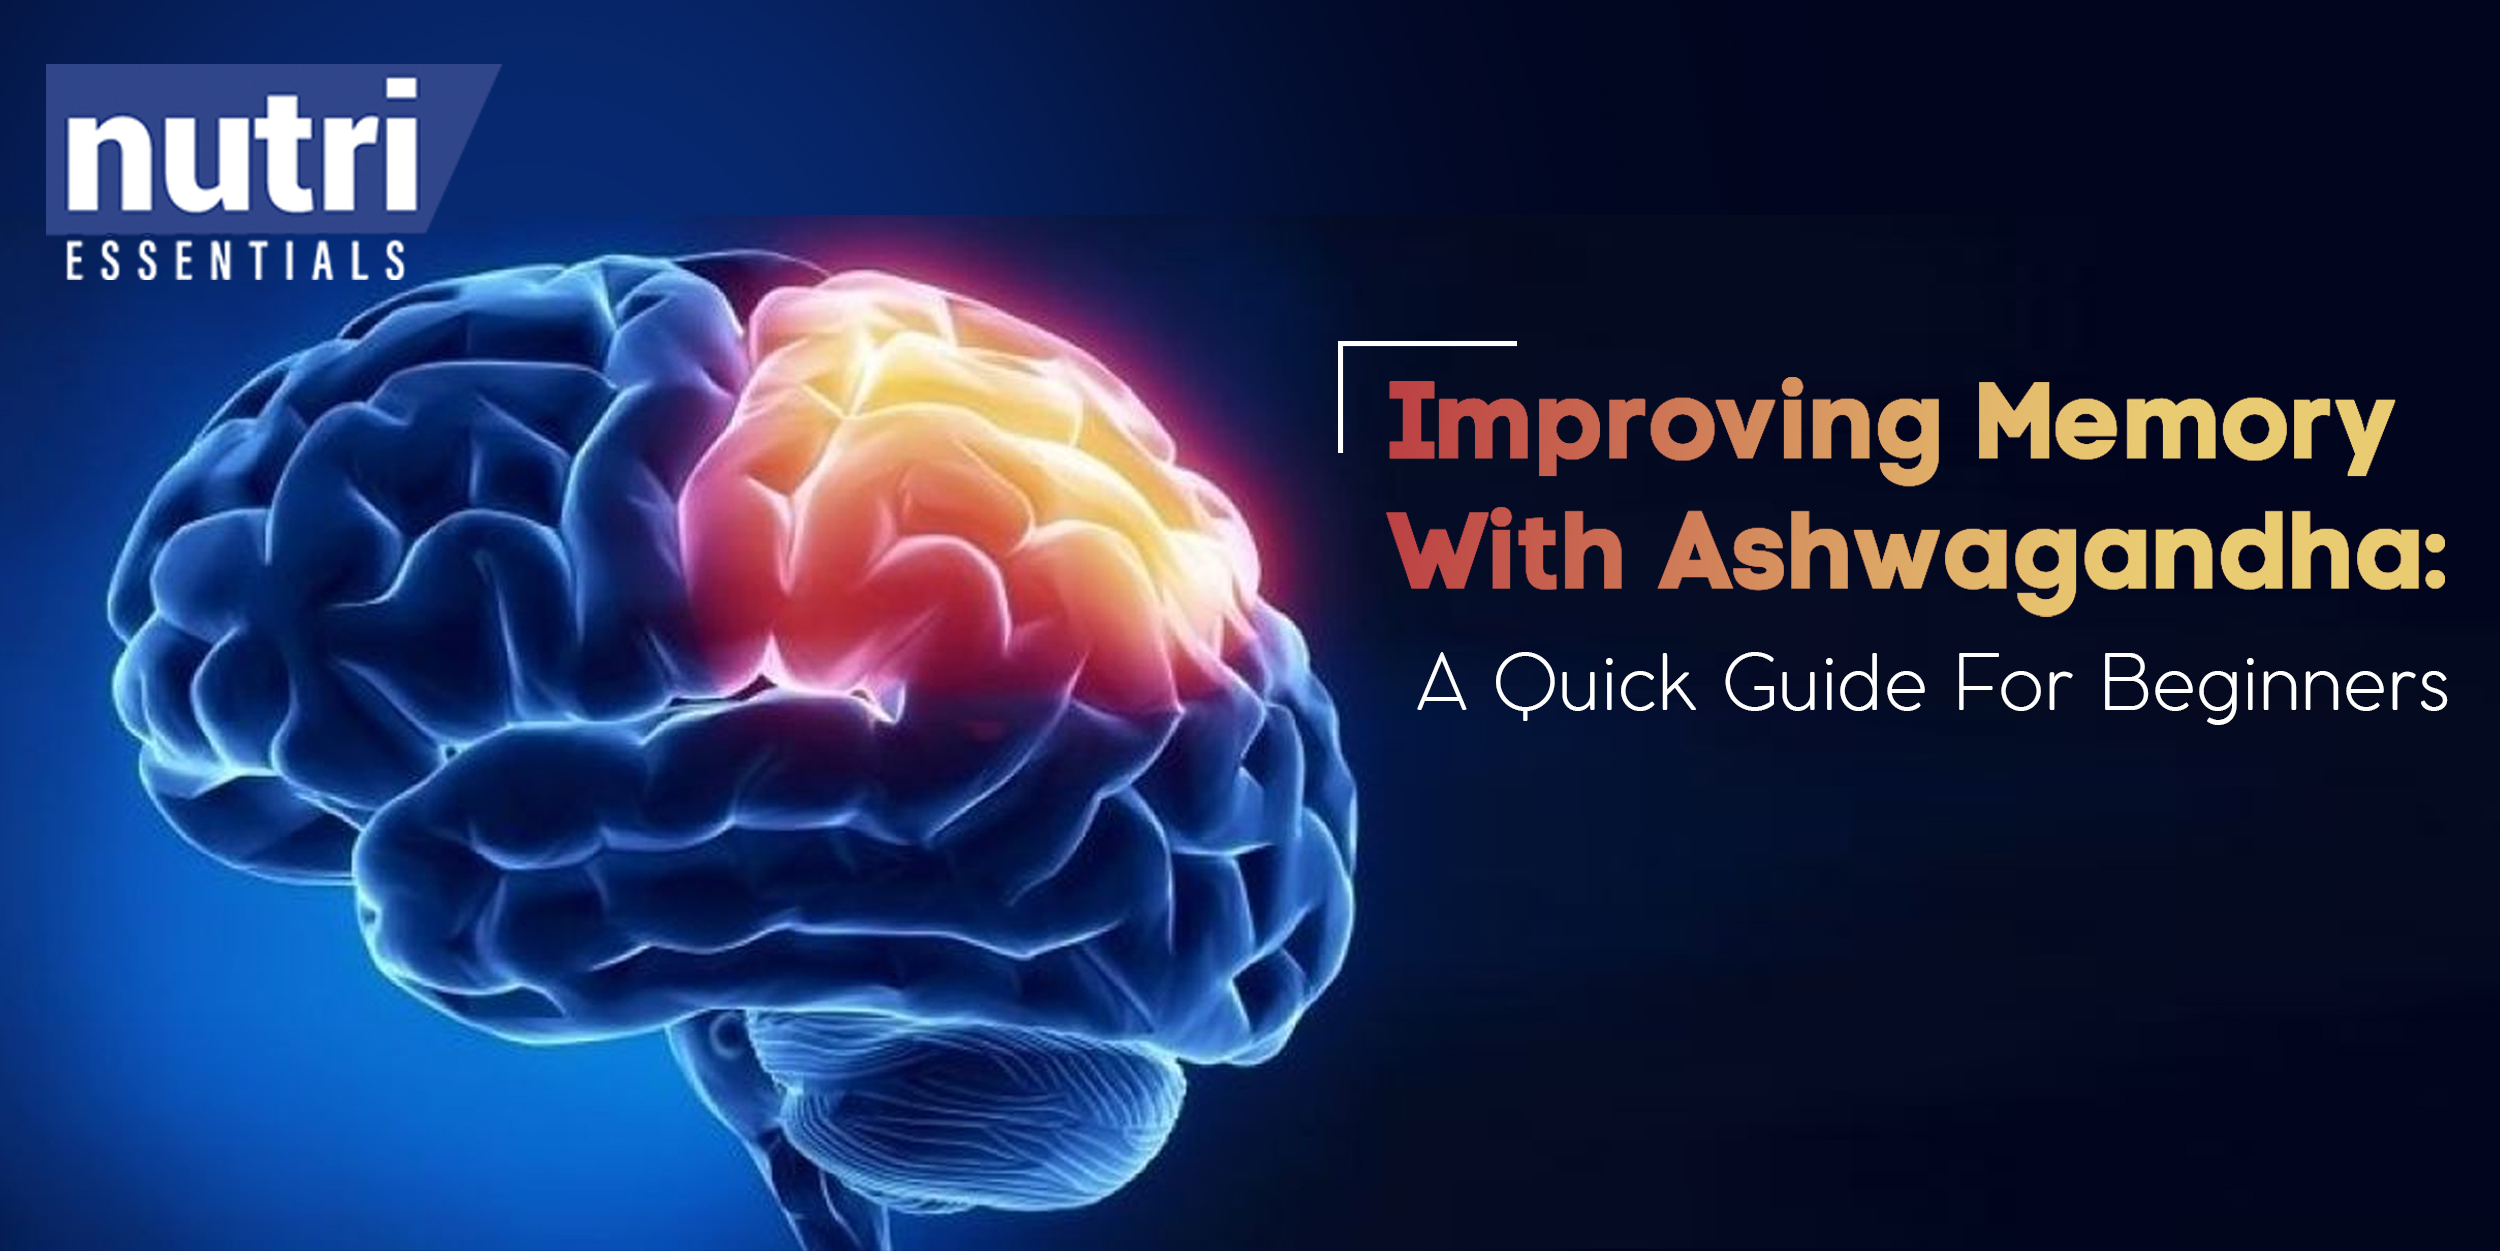 IMPROVING MEMORY WITH ASHWAGANDHA: A QUICK GUIDE FOR BEGINNERS